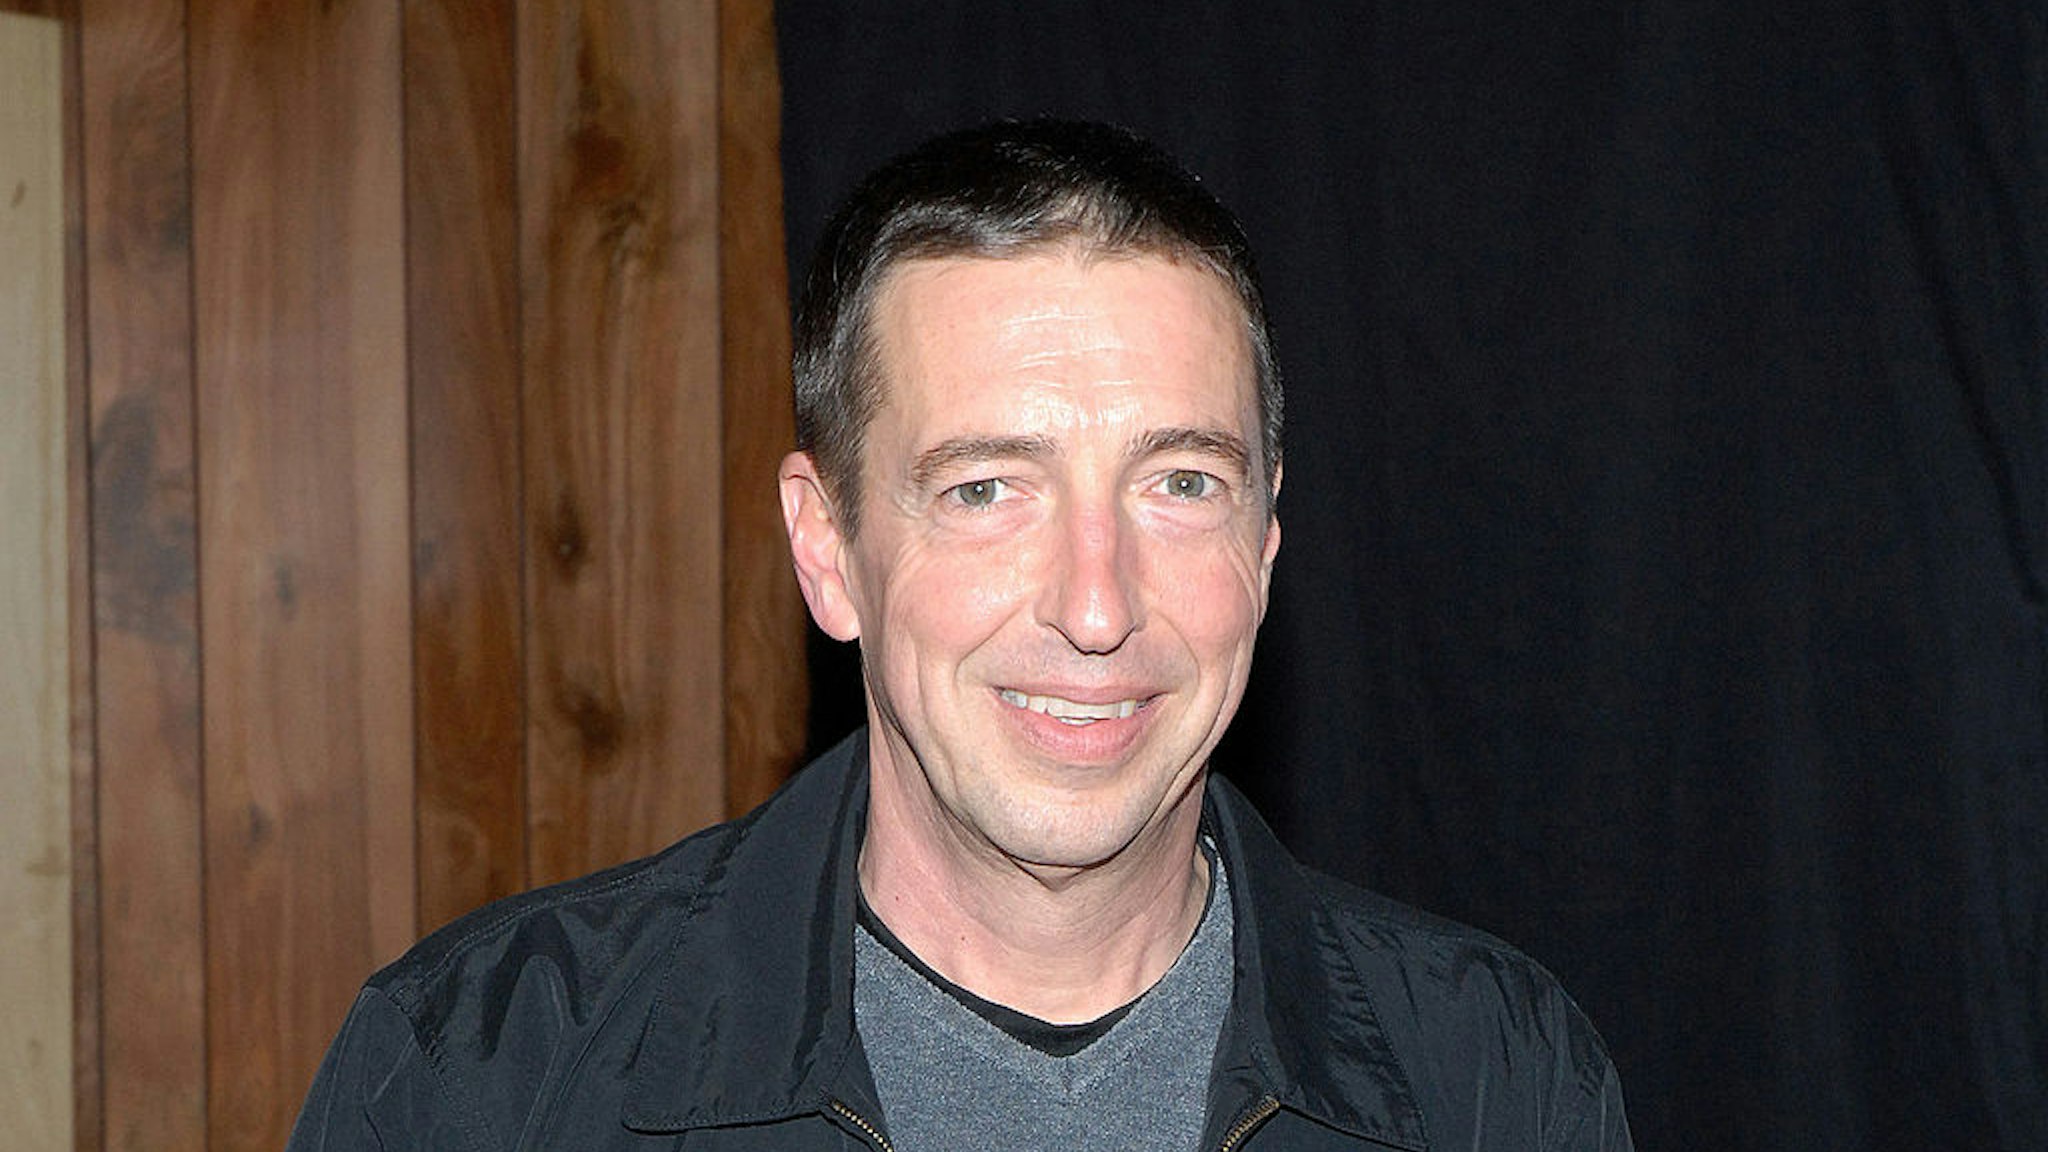 Ron Reagan promotes his new book "My Father at 100" at Bookends Bookstore on January 18, 2011 in Ridgewood, New Jersey.